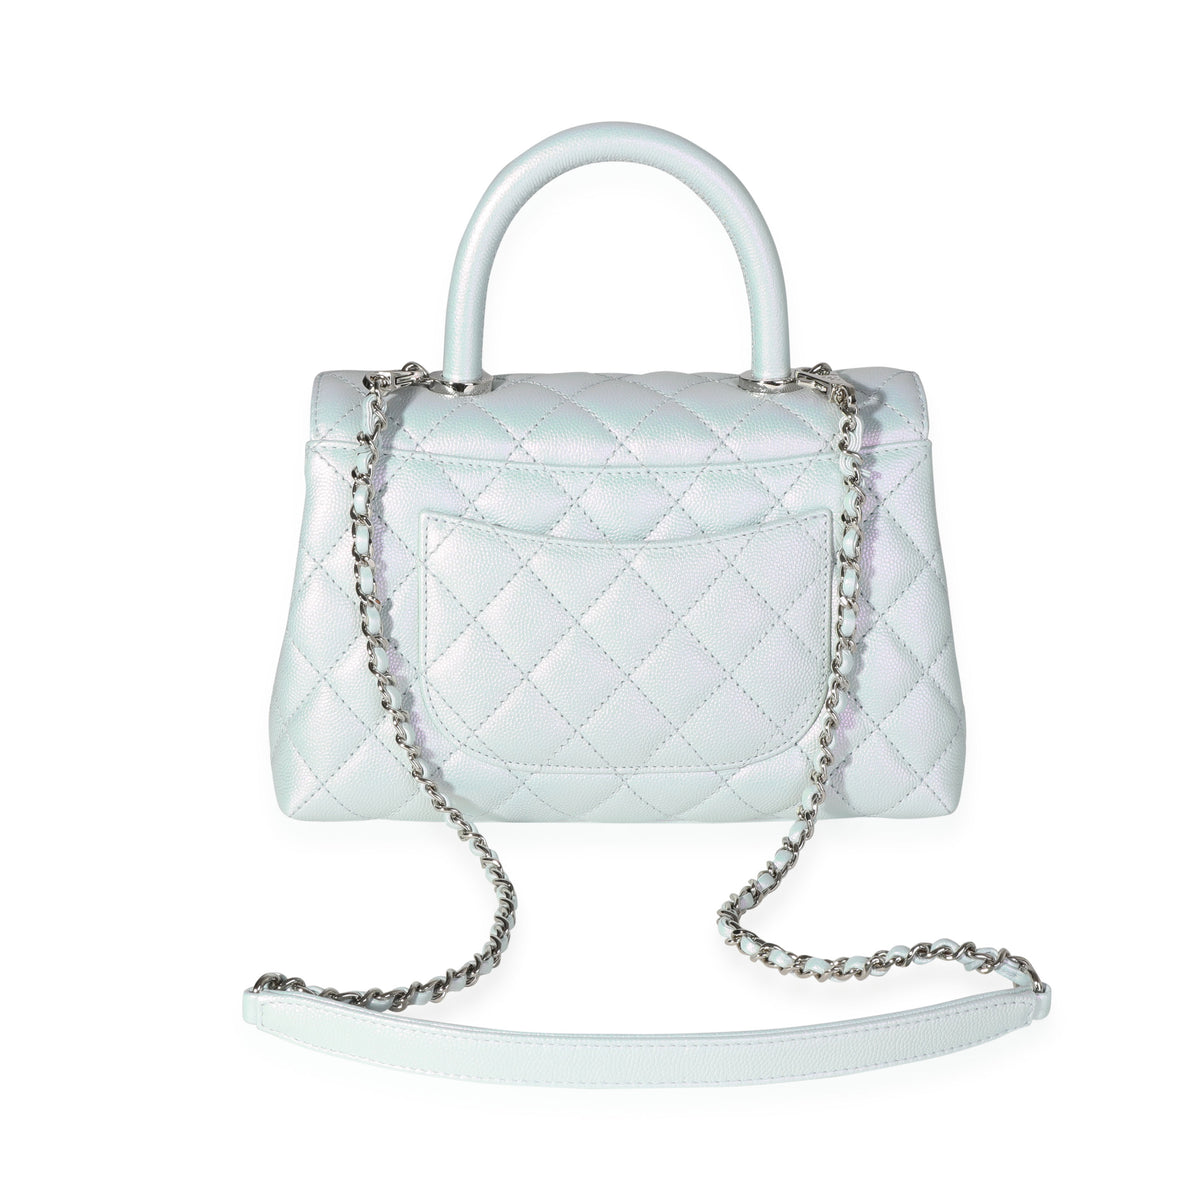 Chanel Light Blue Iridescent Quilted Caviar Small Coco Top Handle Bag, myGemma, IT